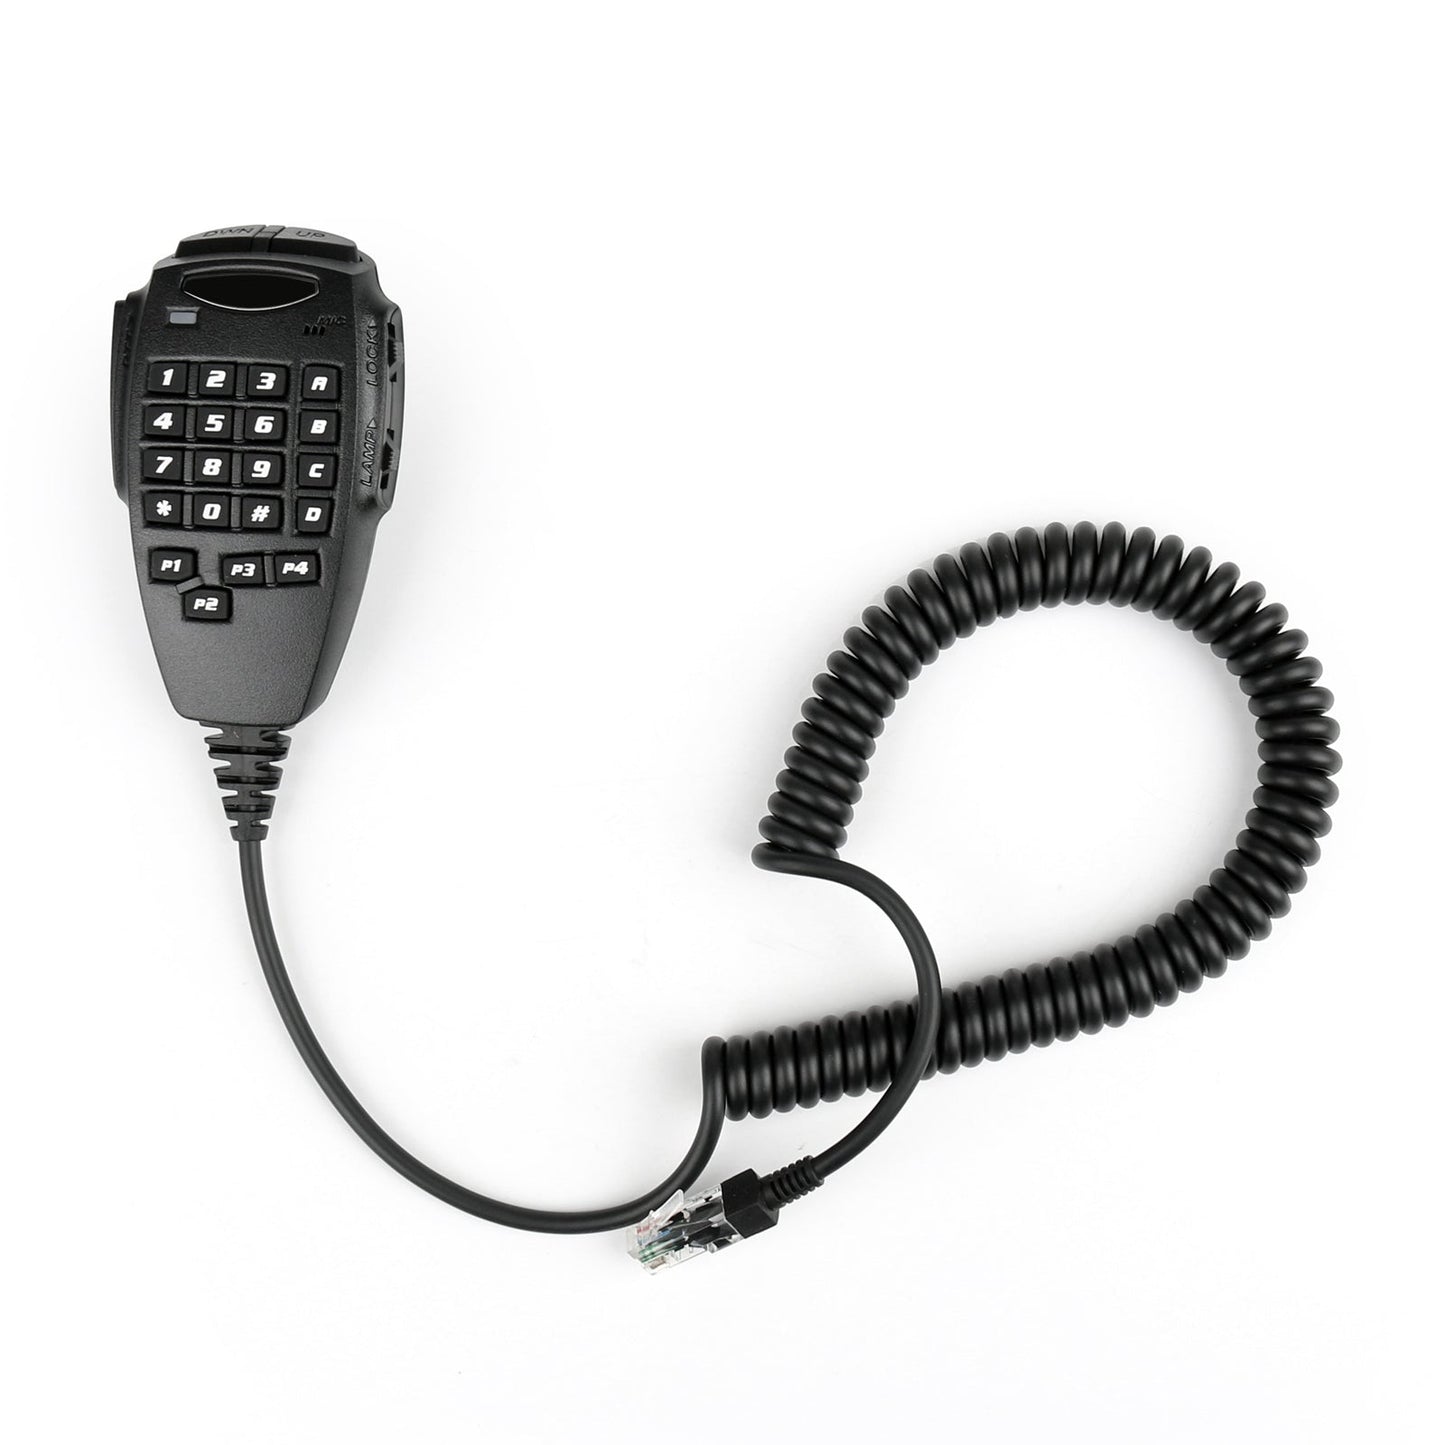 1Pcs Professional Hand Microphone Speaker For TYT TH9800 UHF Mobile Car Radio